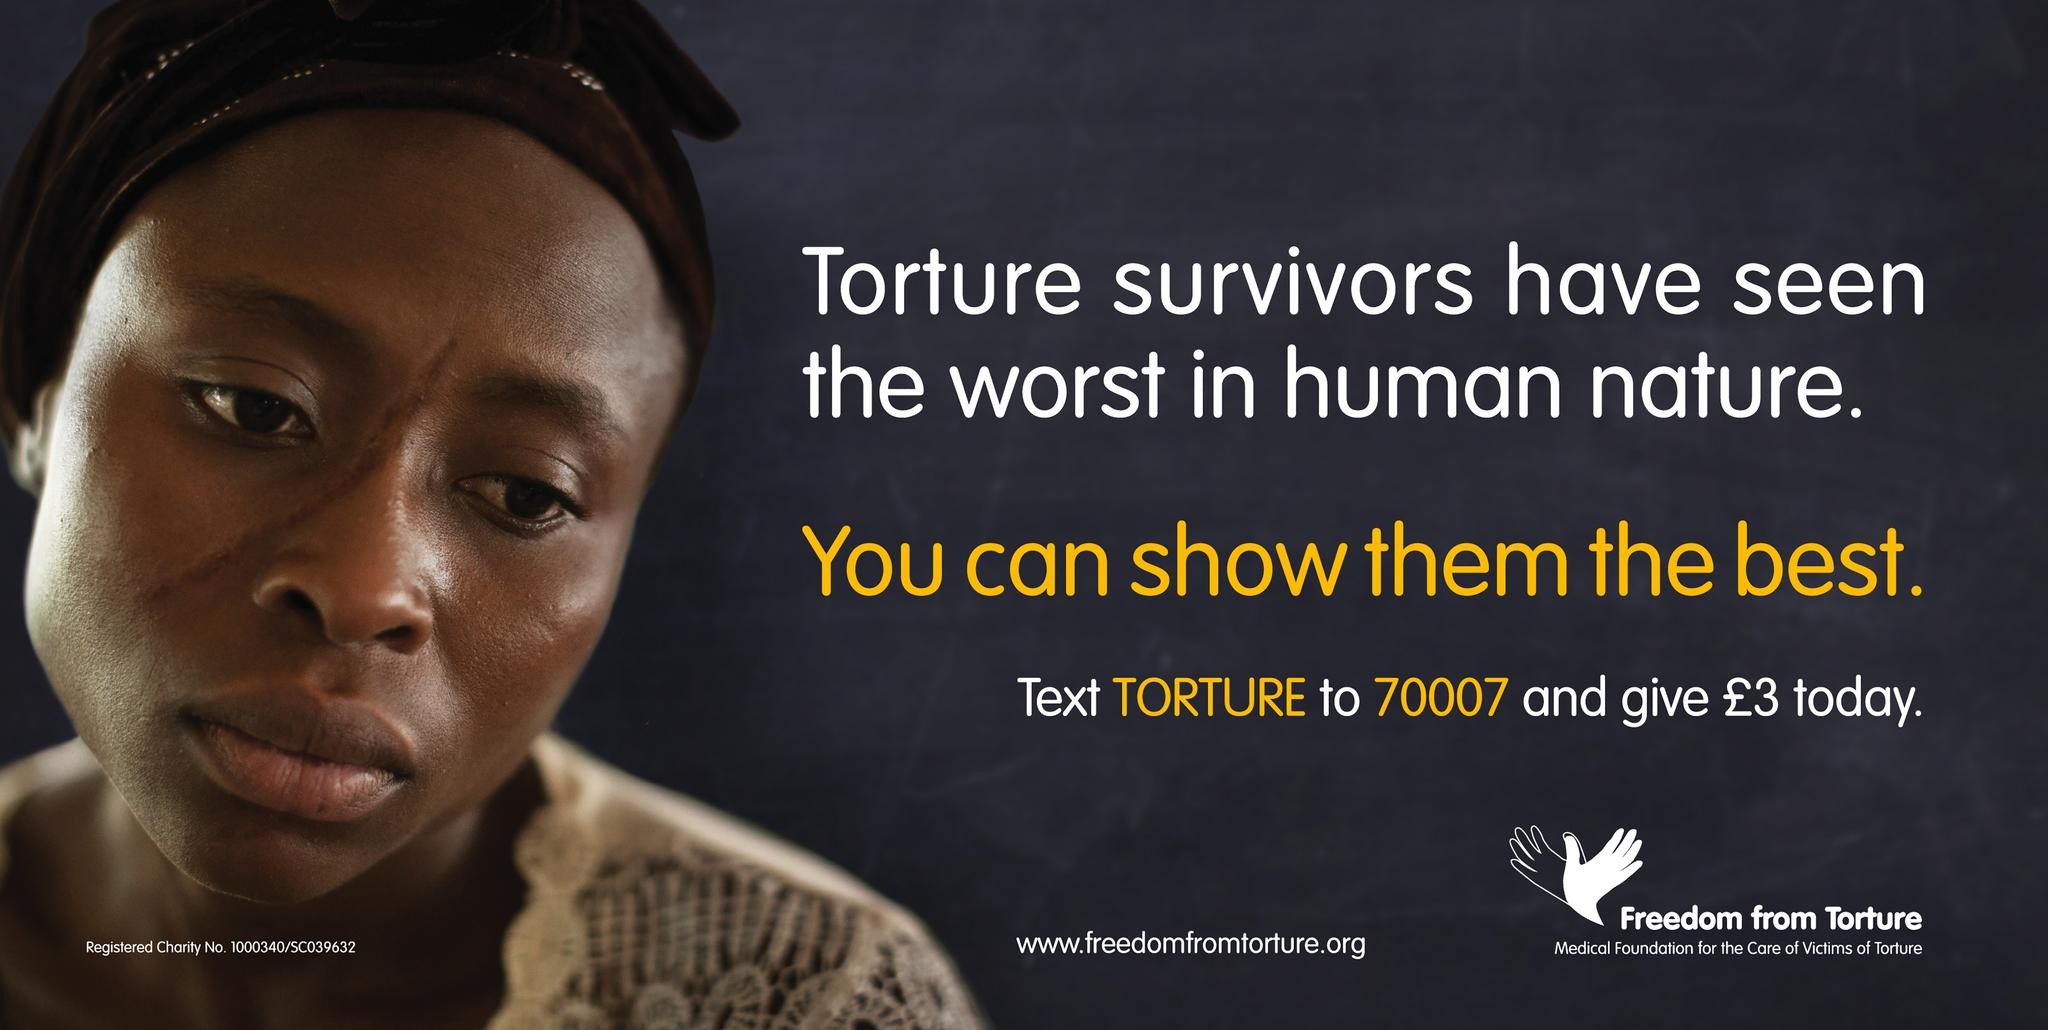 TORTURE: THE WORST IN HUMAN NATURE